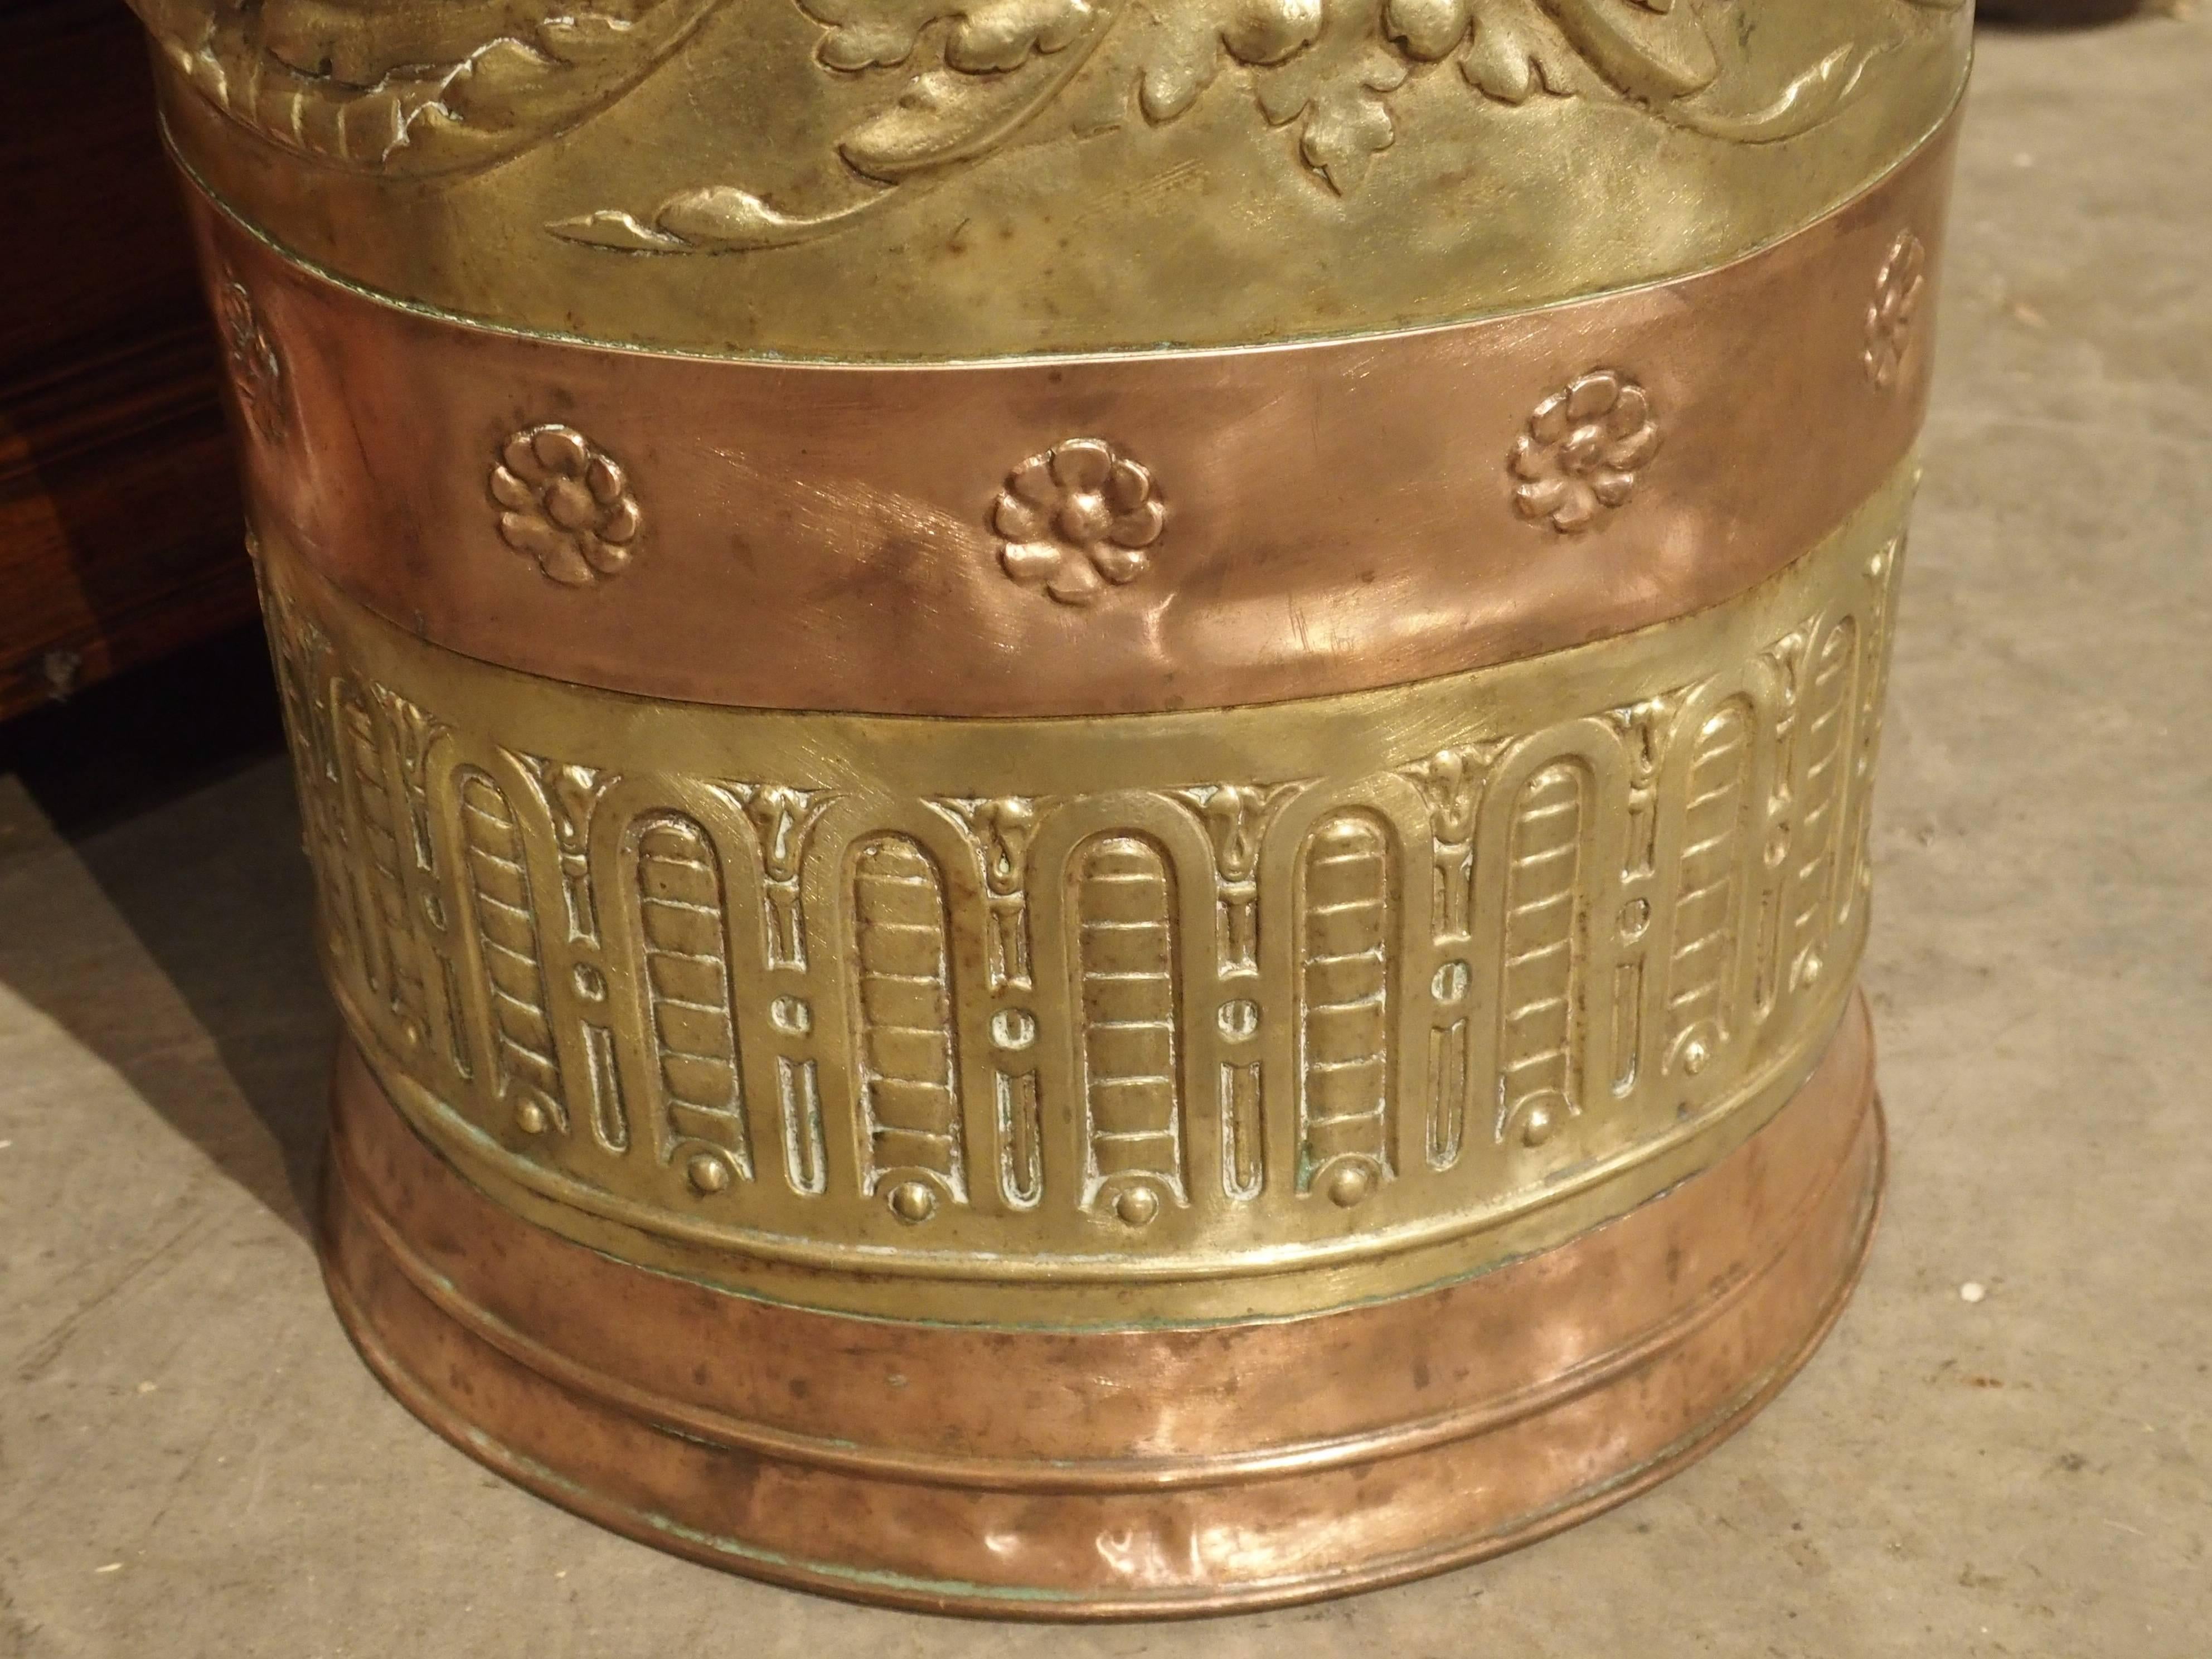 Repoussé Antique Copper and Brass Repousse Umbrella Holder from France, 1800s